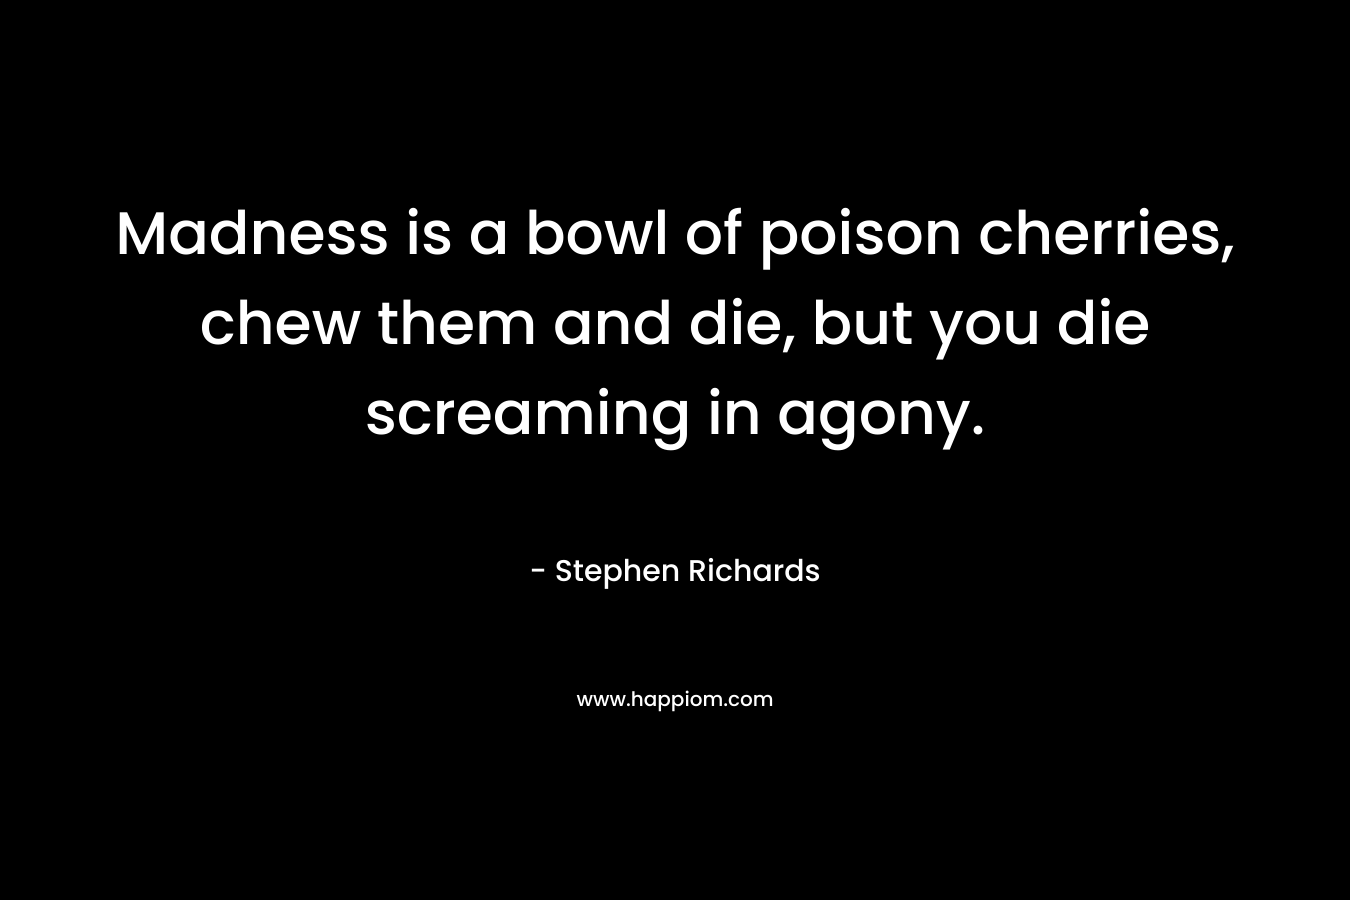 Madness is a bowl of poison cherries, chew them and die, but you die screaming in agony. – Stephen Richards